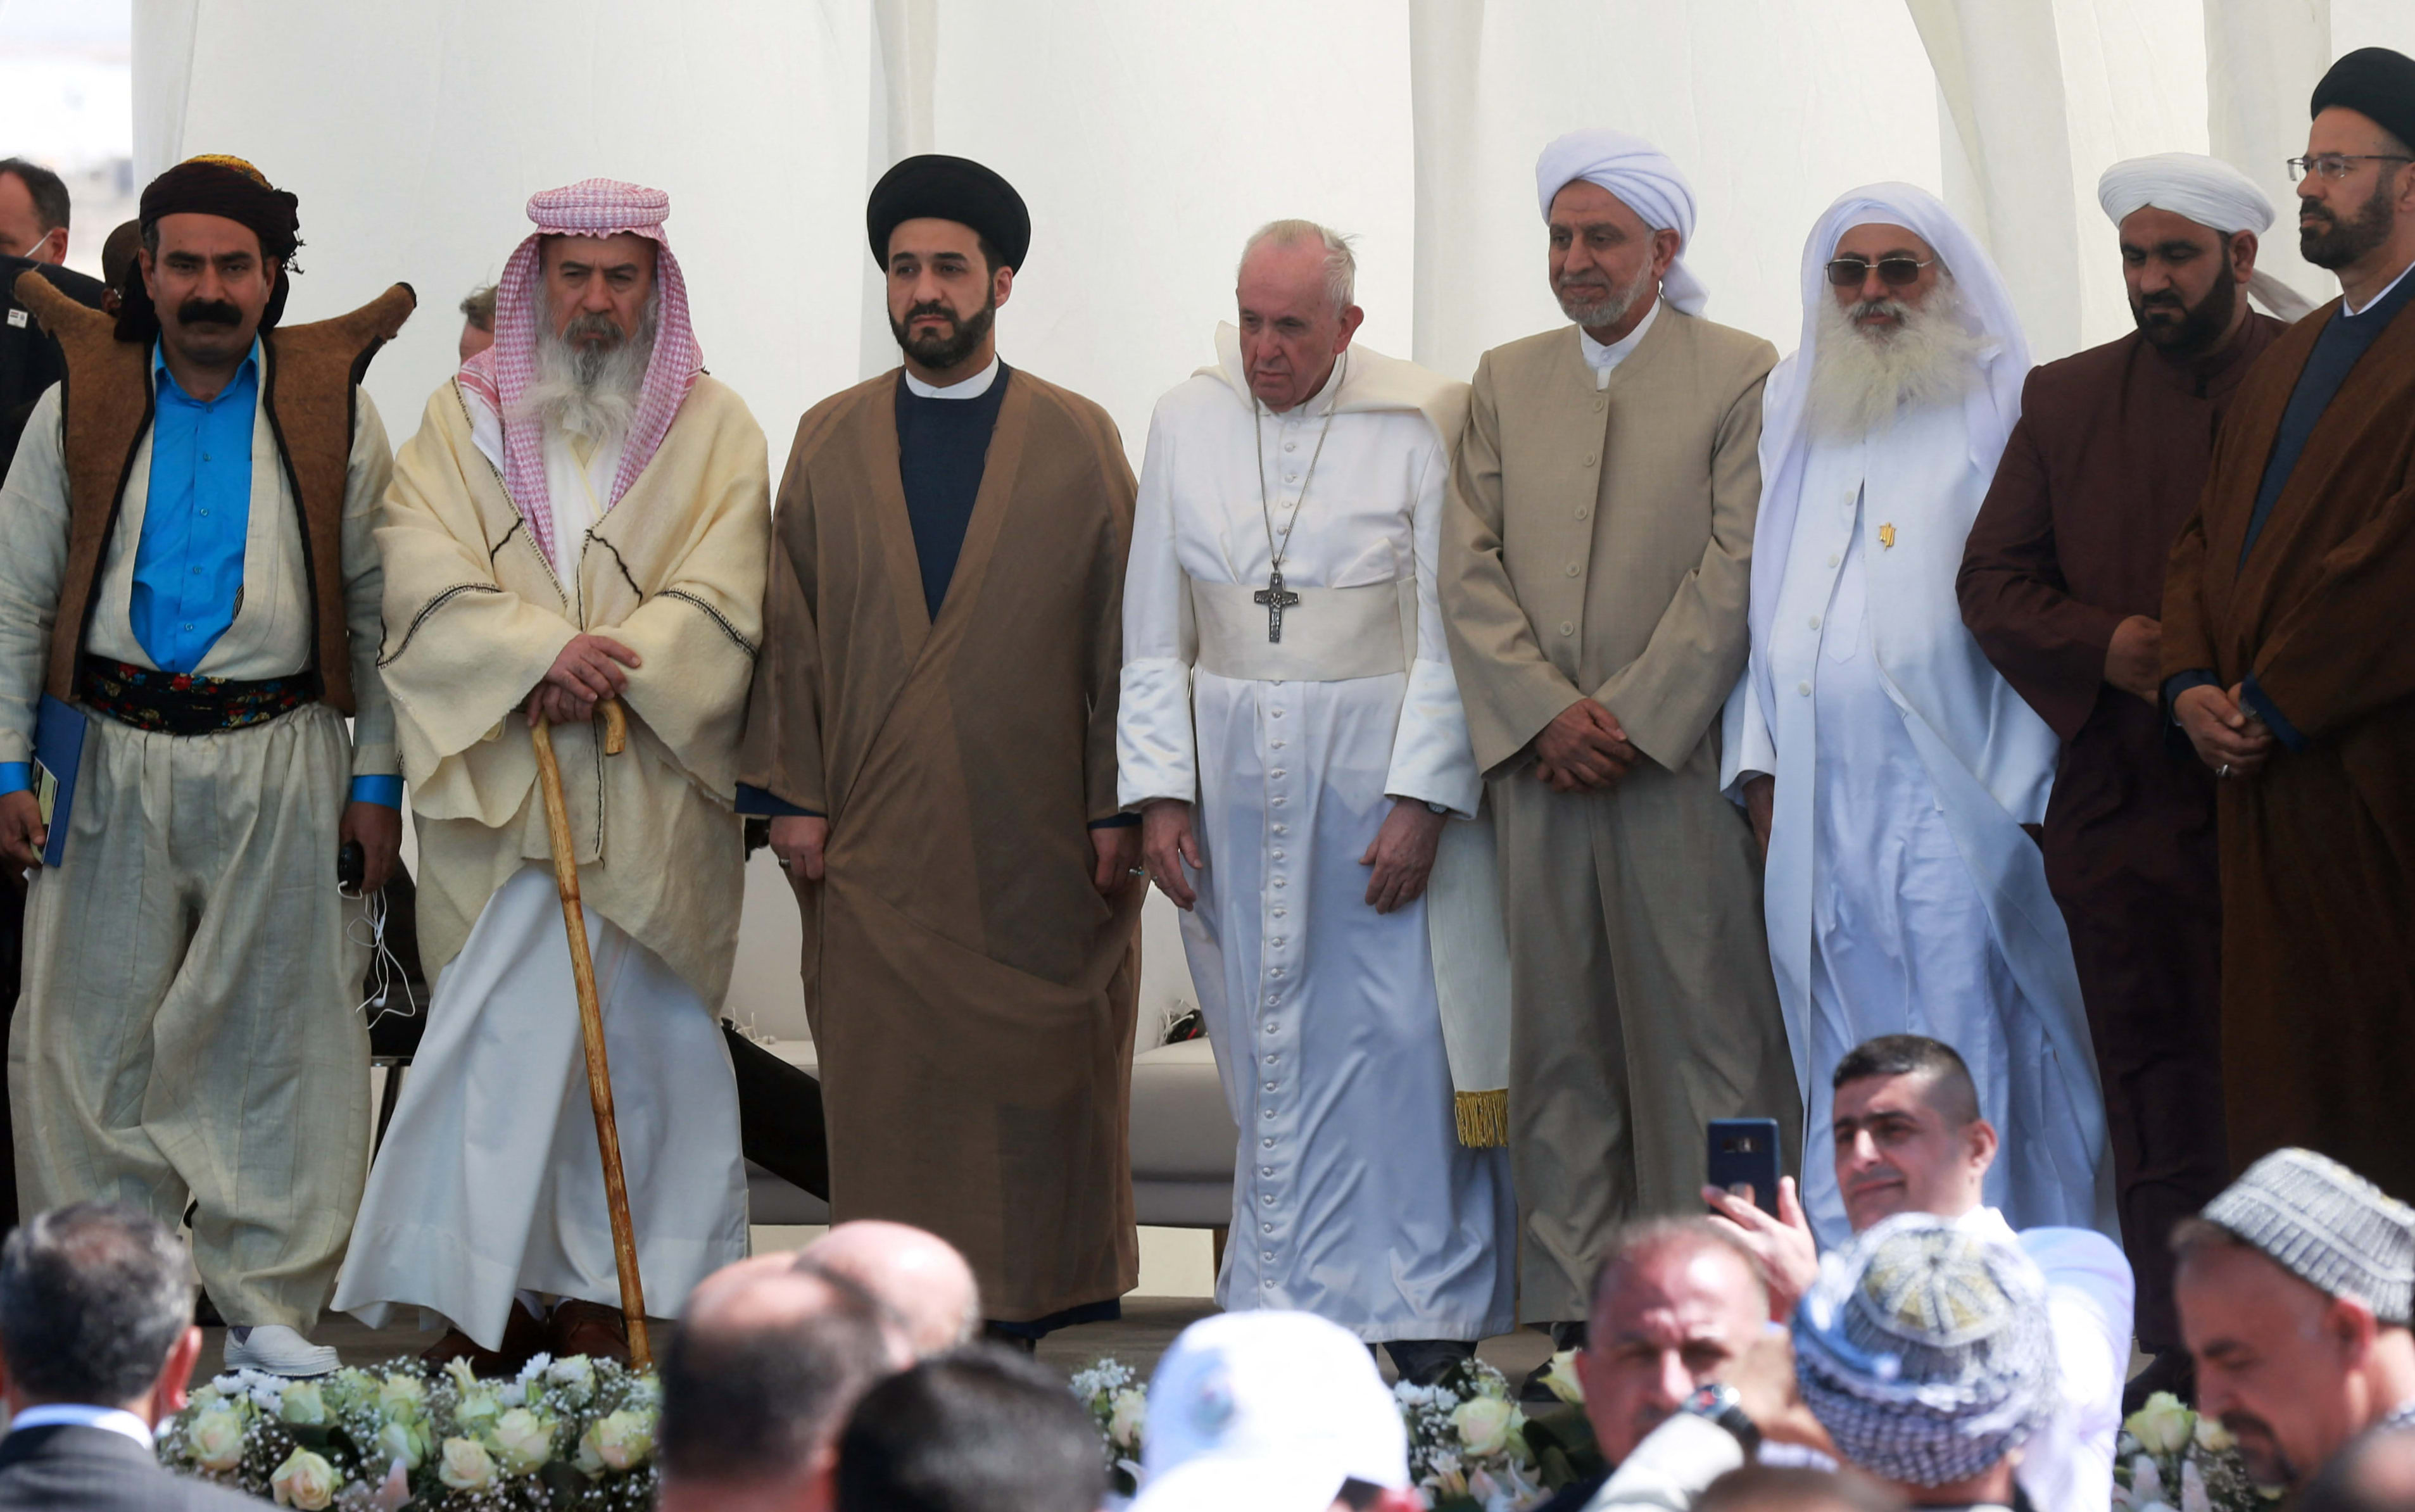 Pope Francis (centre) attends an inter-religious meeting on the Plain of Ur, considered the birthplace of the prophet Abraham, in Iraq.